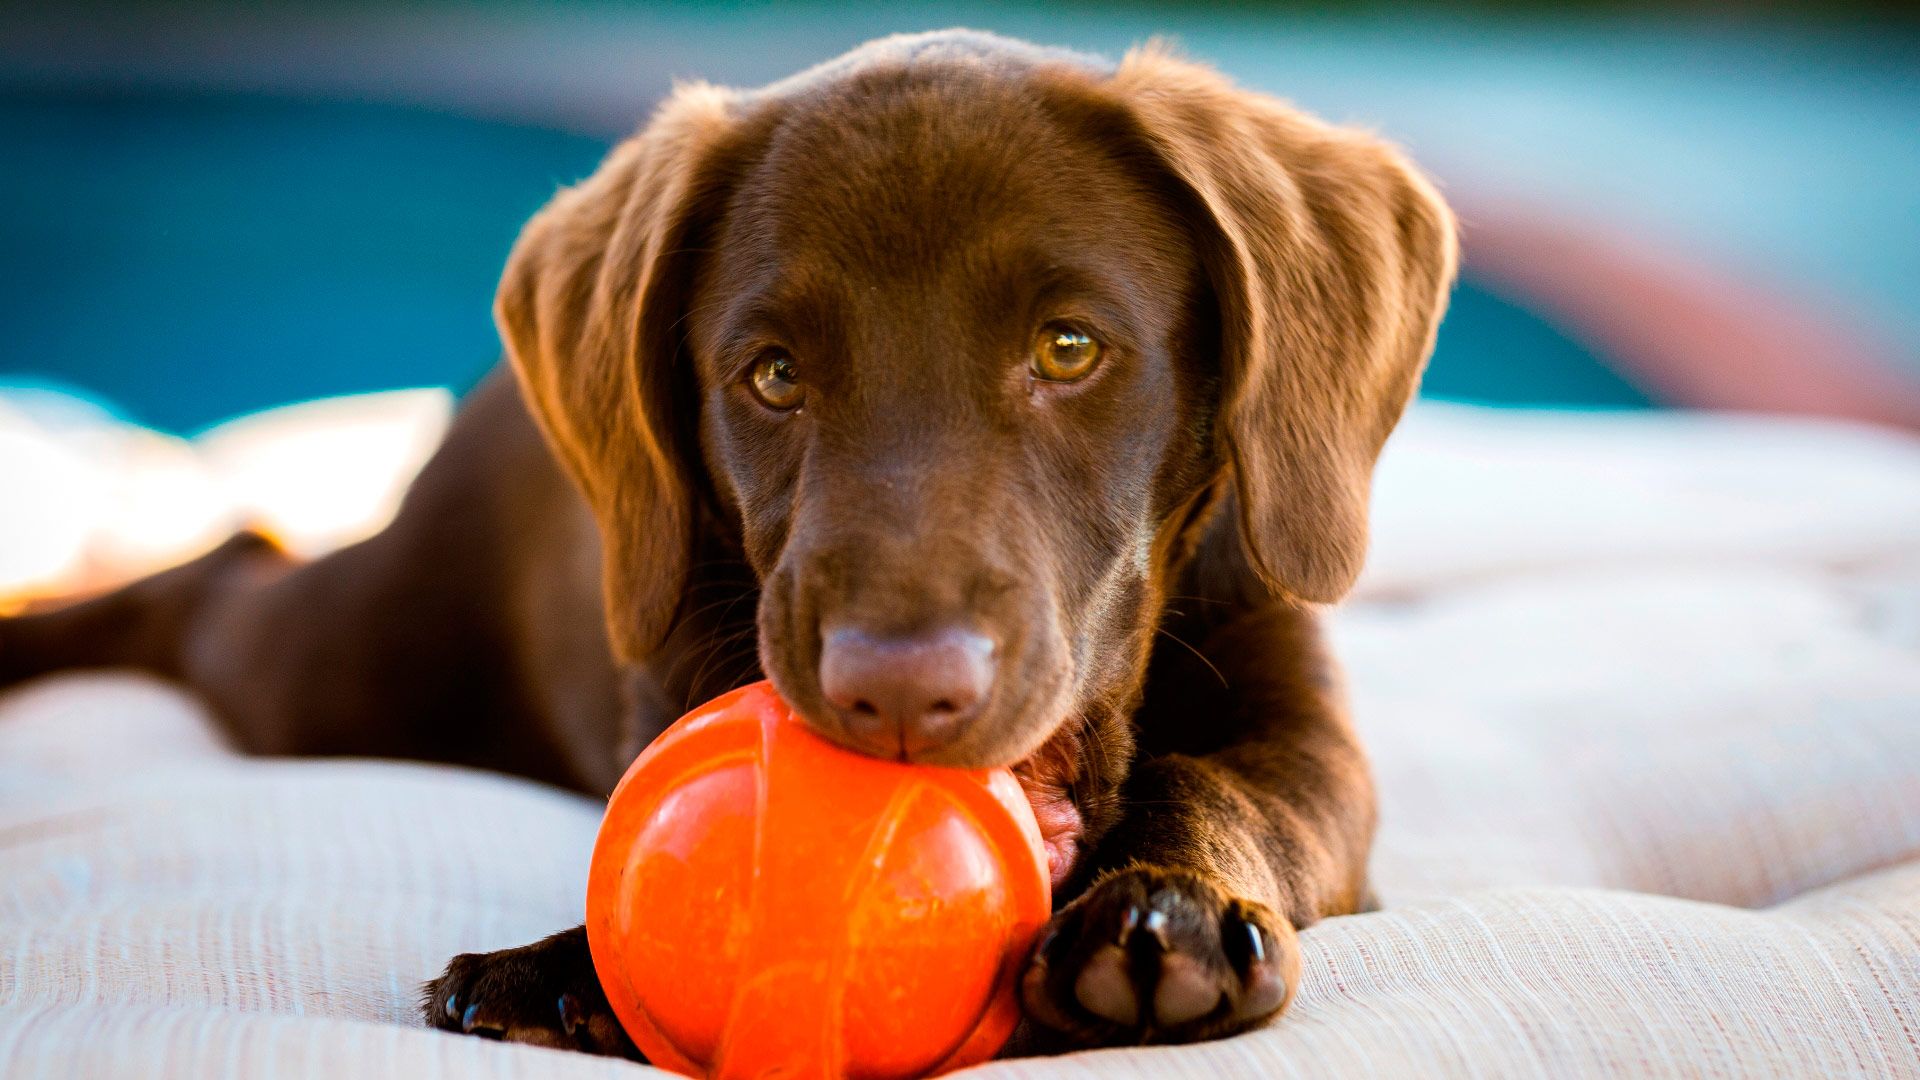 Greater Palm Springs Dog-Friendly Hotels - Places to Stay